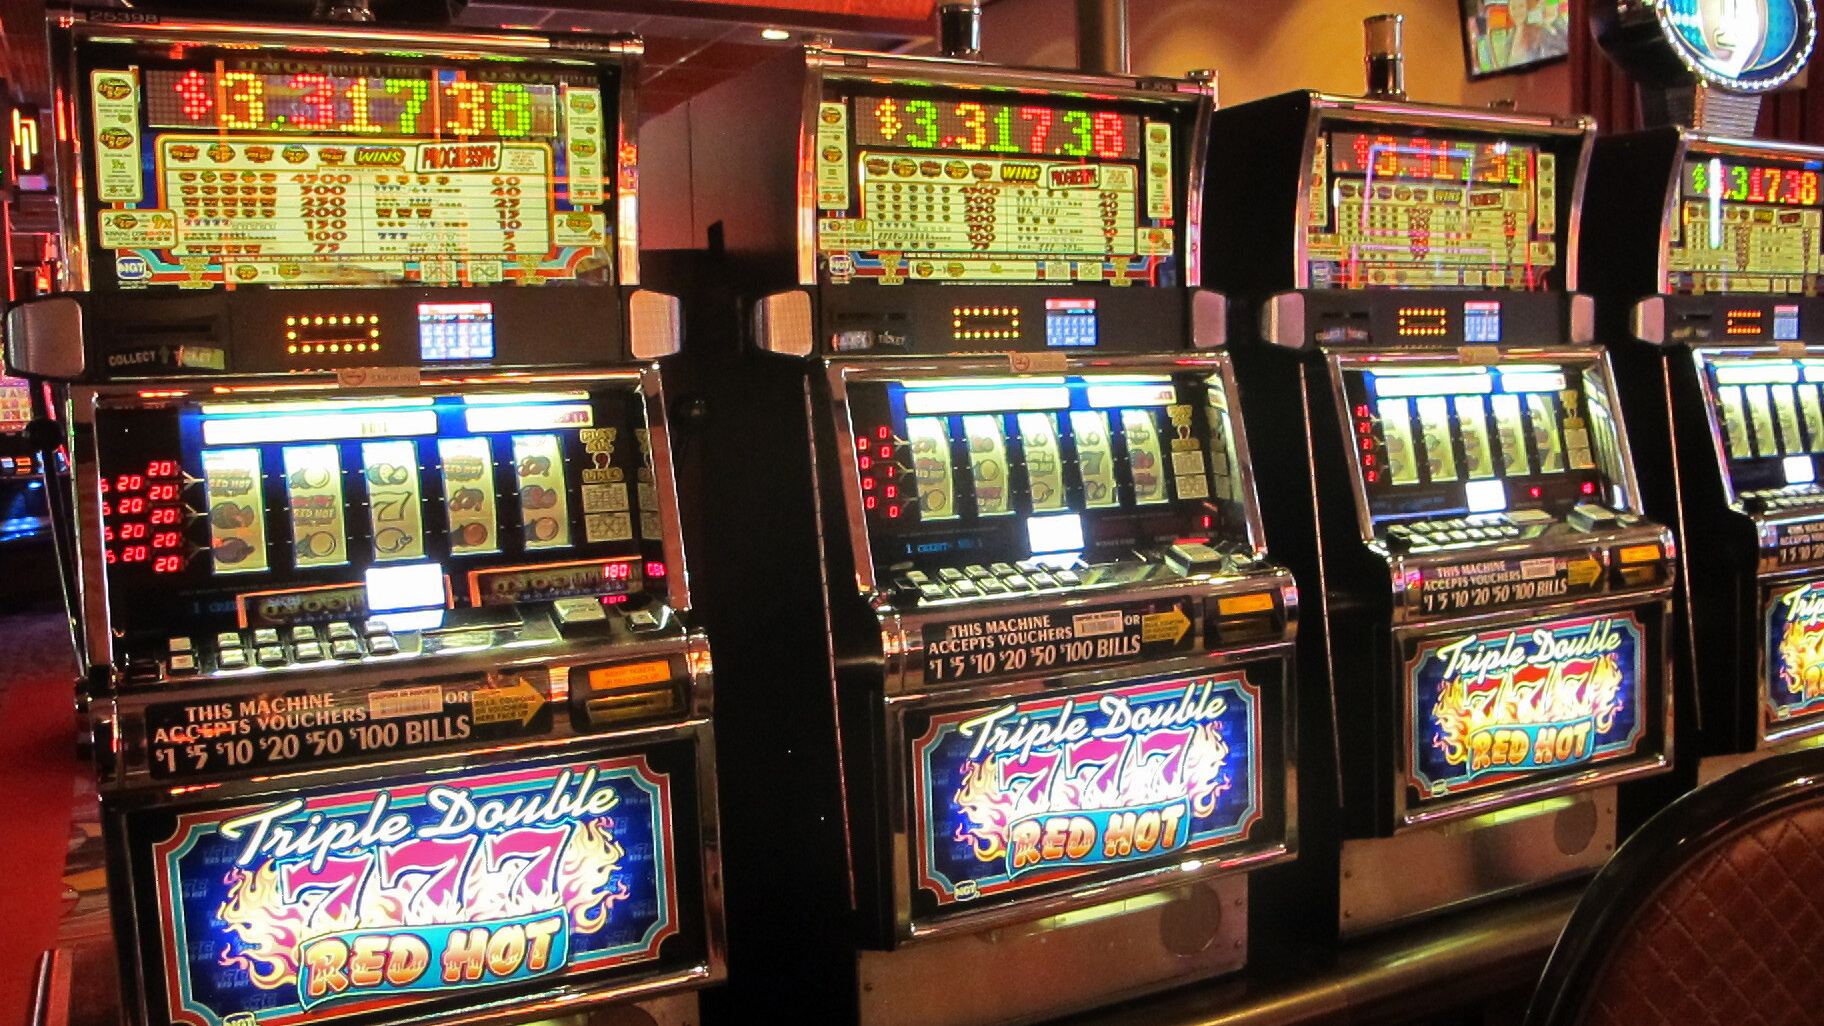 Do casinos know when slots will hit?